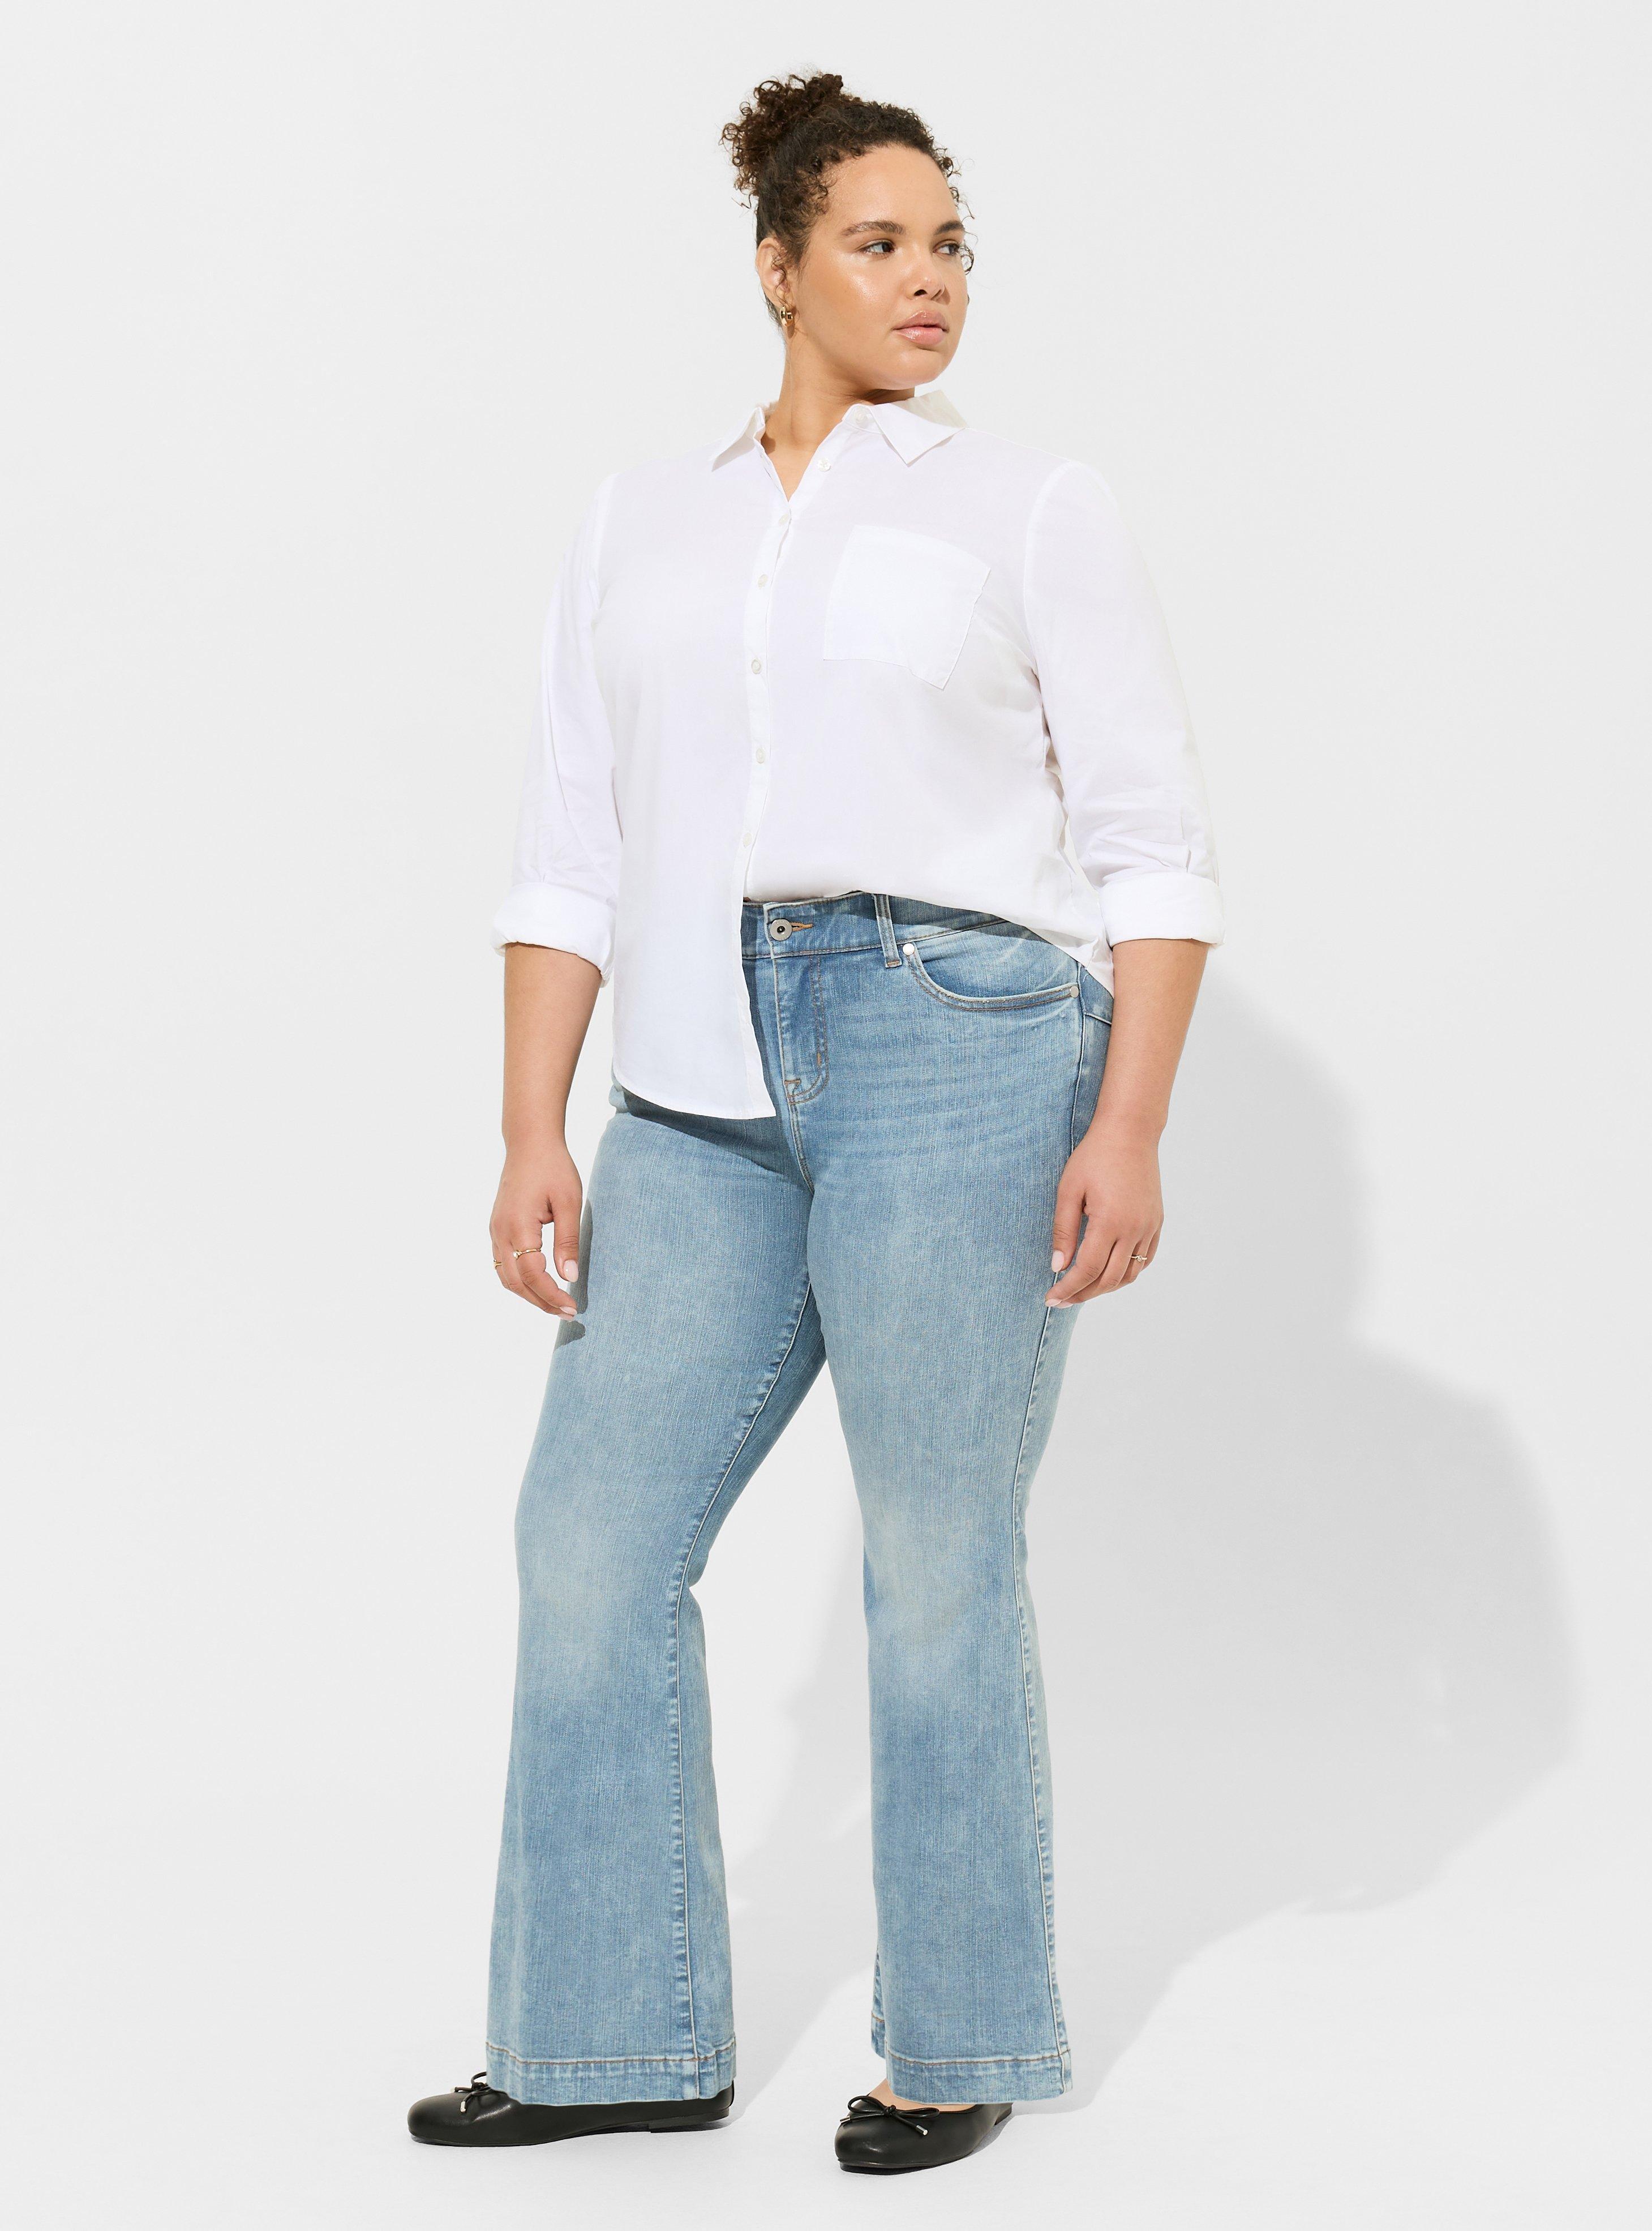 Wider Hips? Try Bell-Bottom Jeans to Achieve a Perfect Hourglass Shape and  Celebrity Look